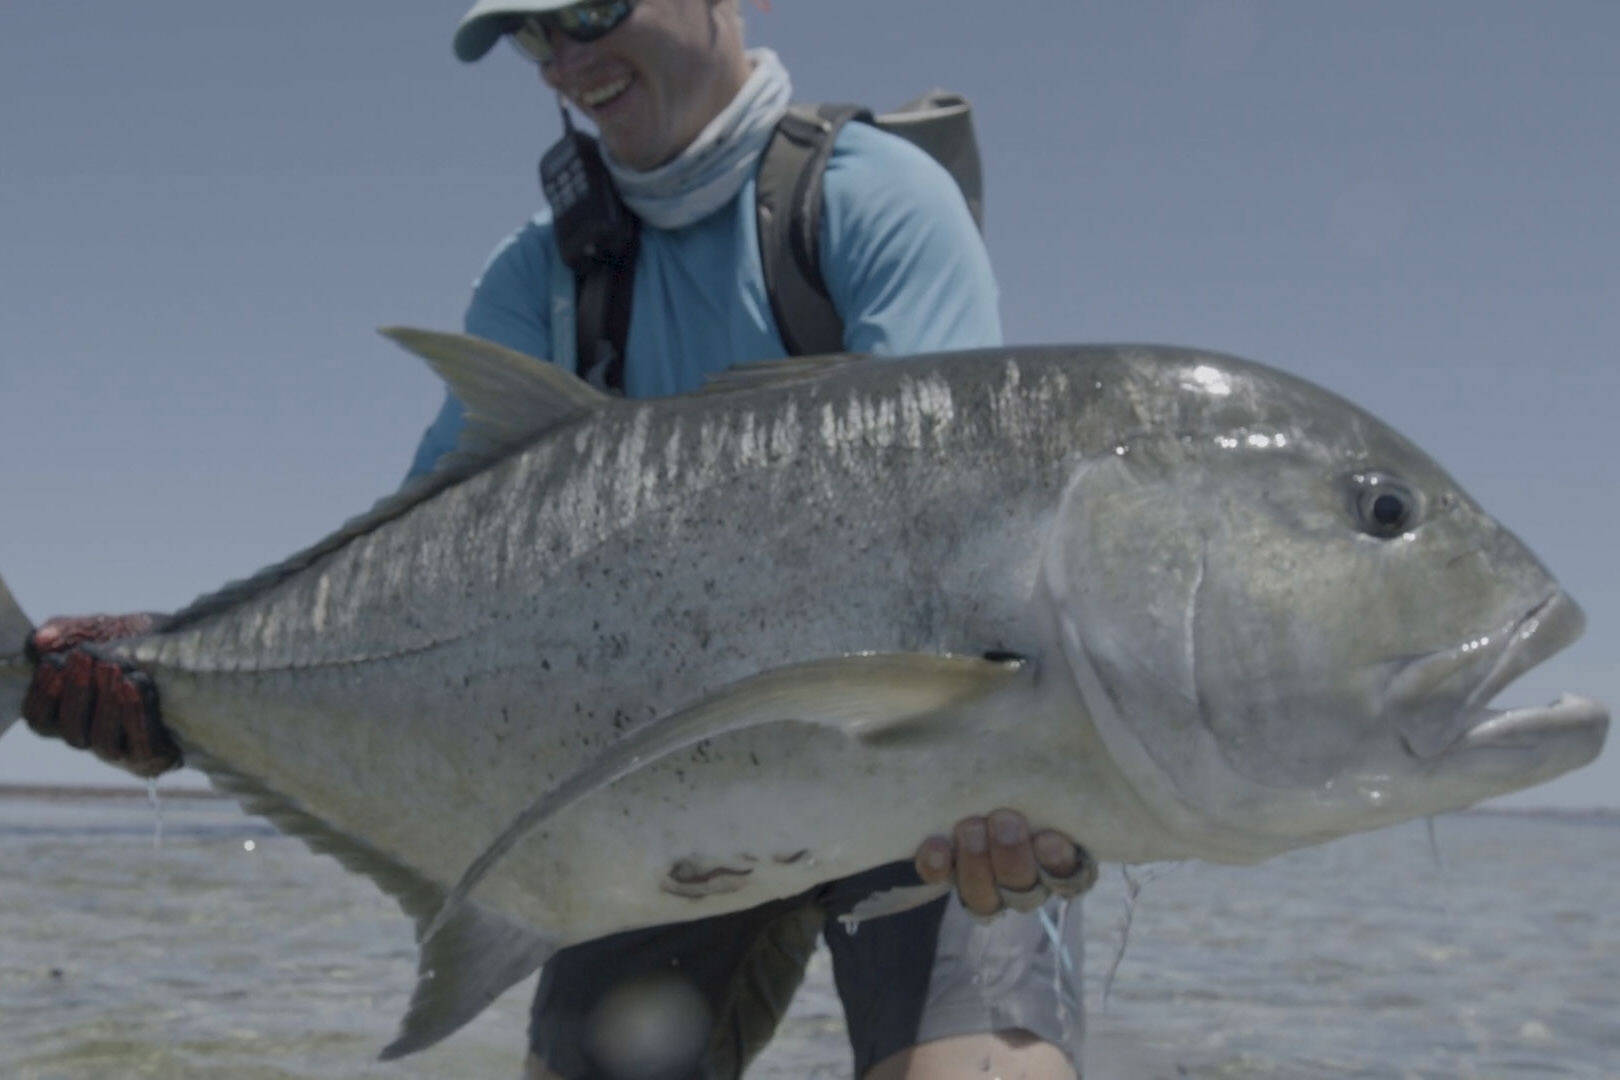 An angler holds up a massive fish in “Jacks: A Film by Jako Lucas & Ra Beattie.” (Photo courtesy International Fly Fishing Festival)